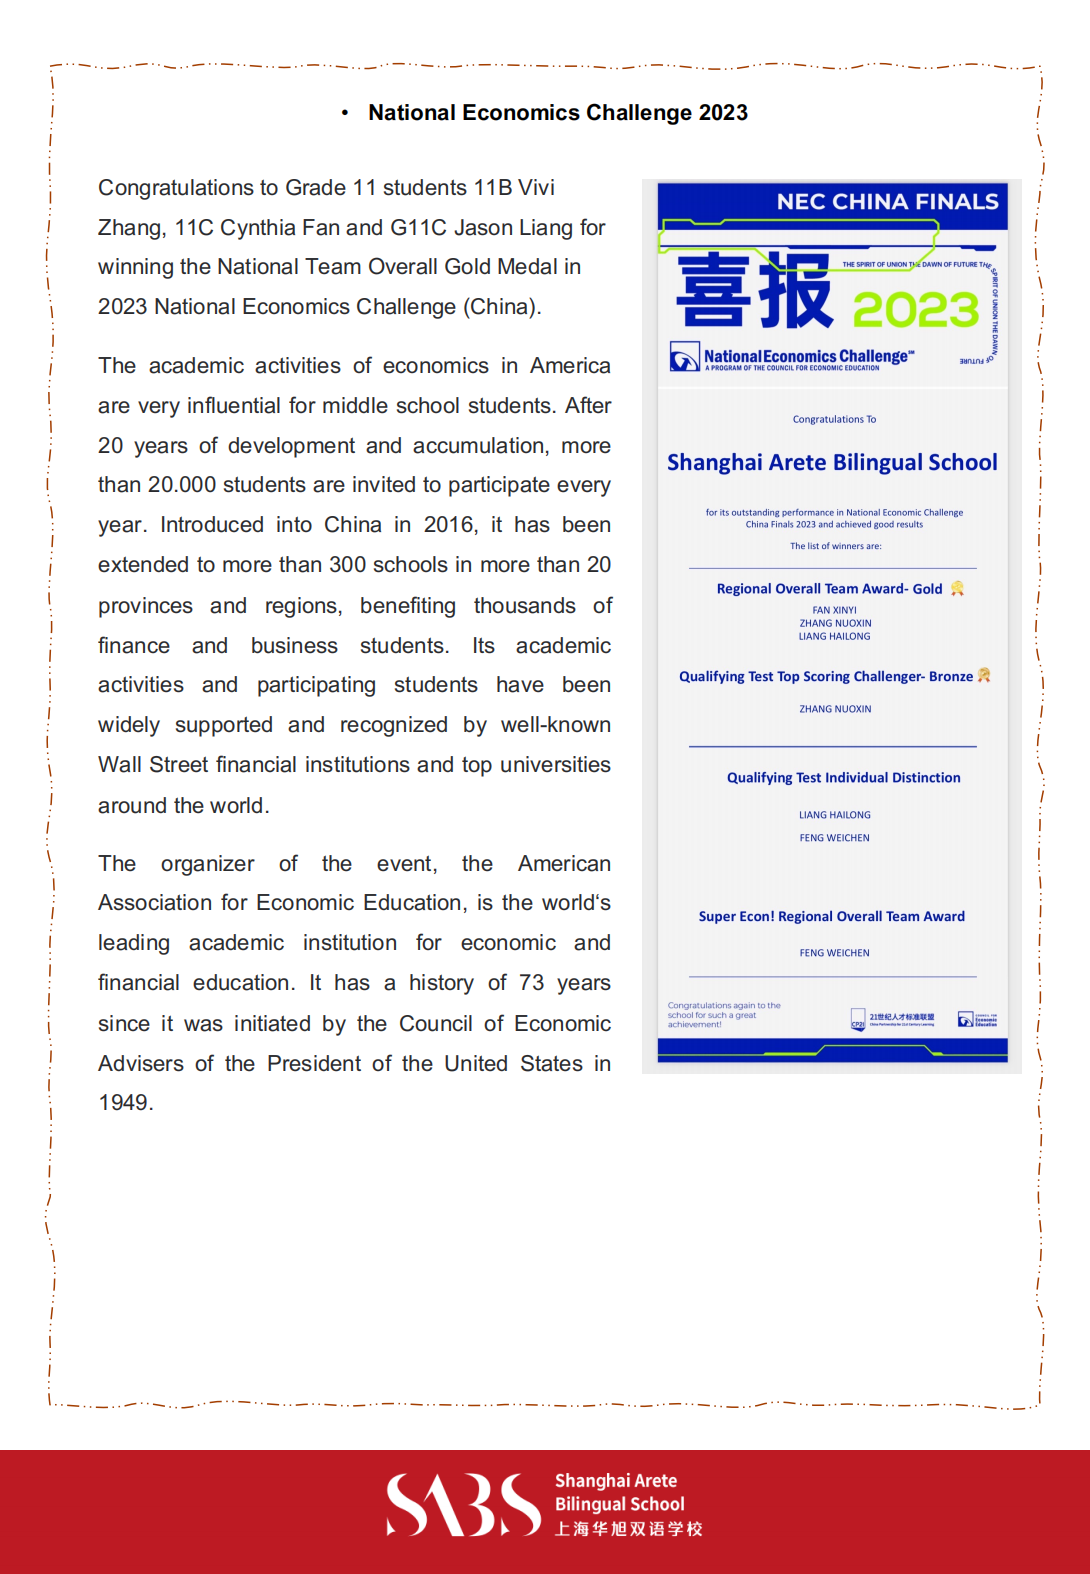 HS 5th Issue Newsletter pptx（English）_15.png